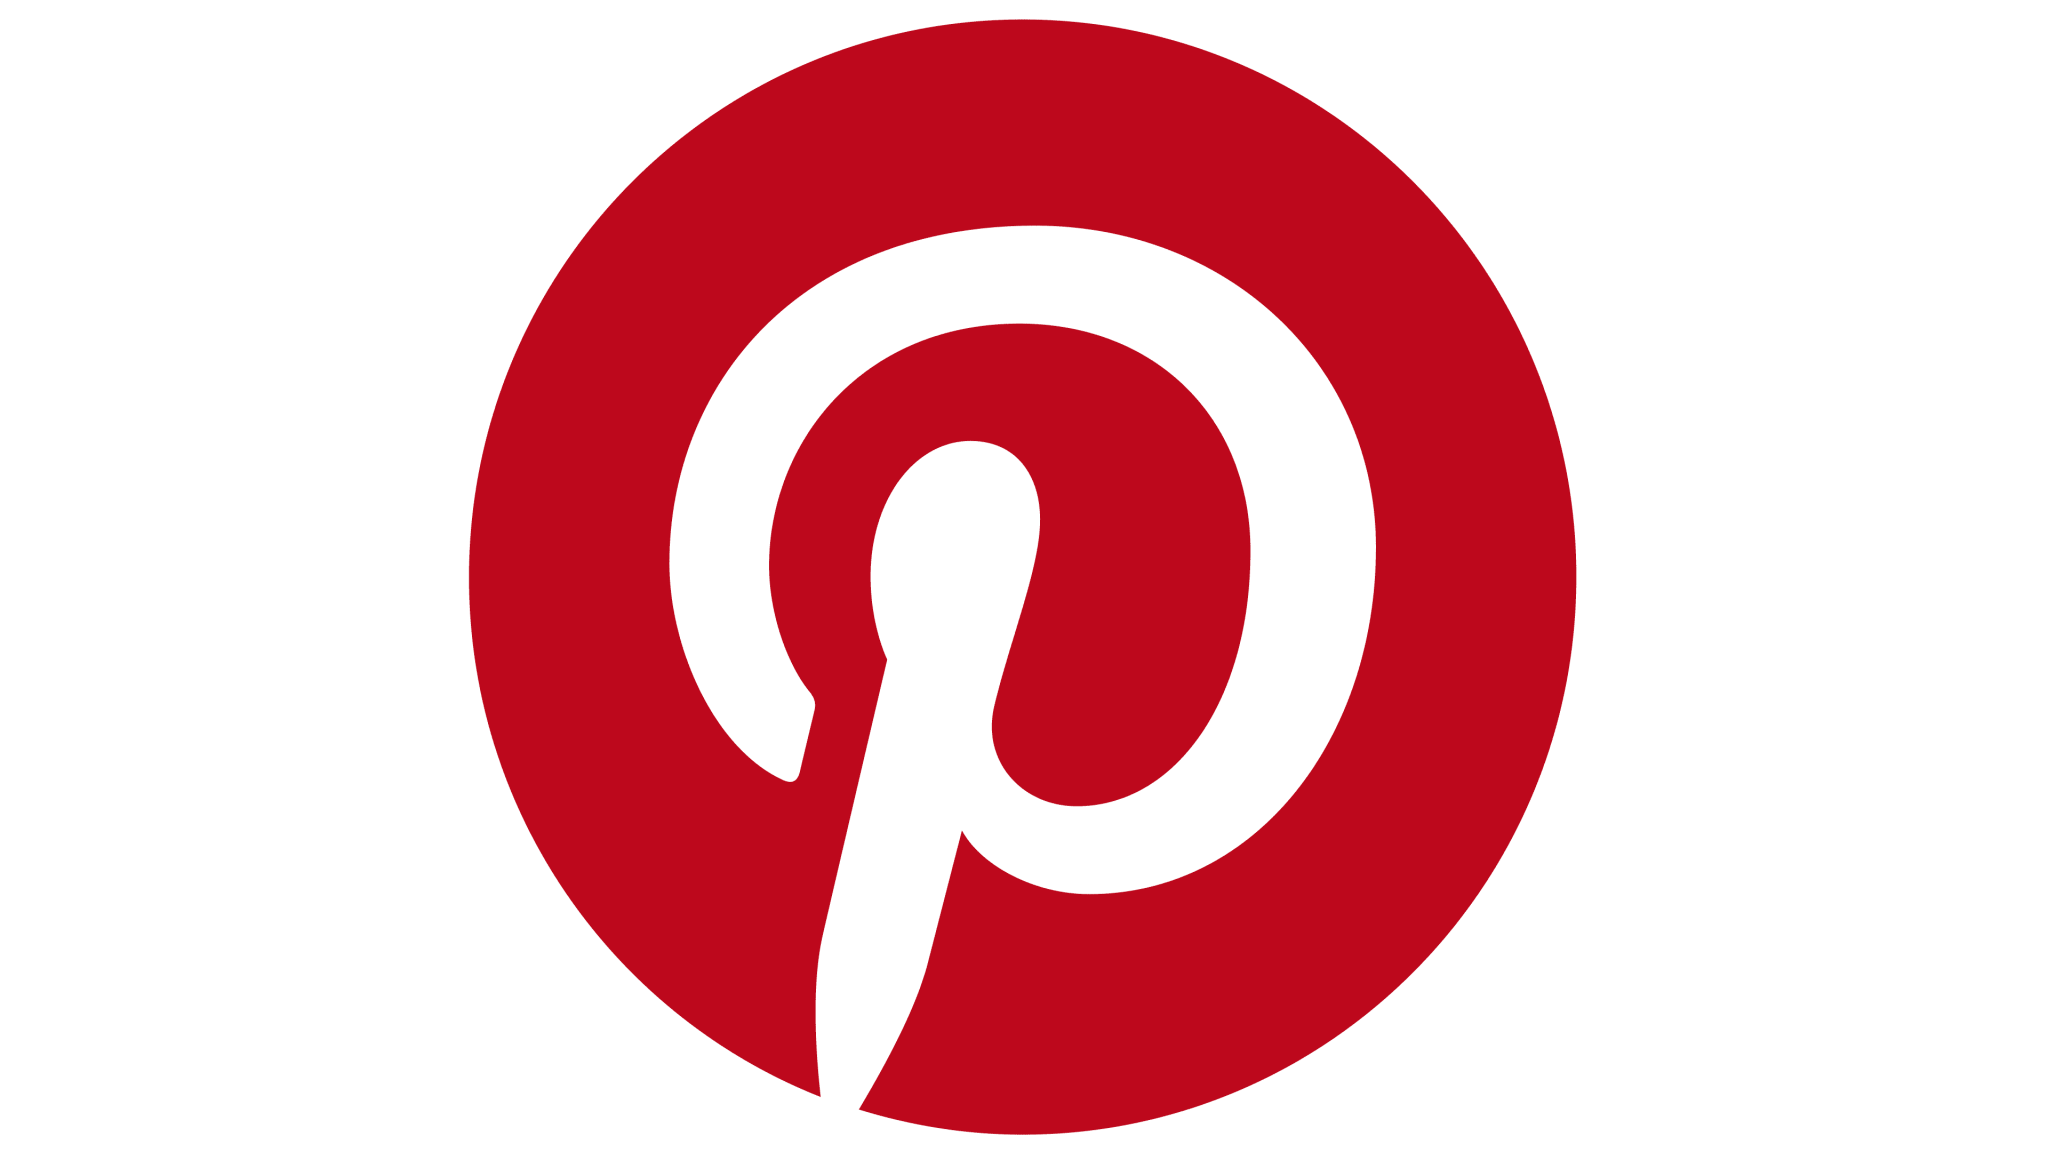 Pinterest Logo and symbol, meaning, history, sign.